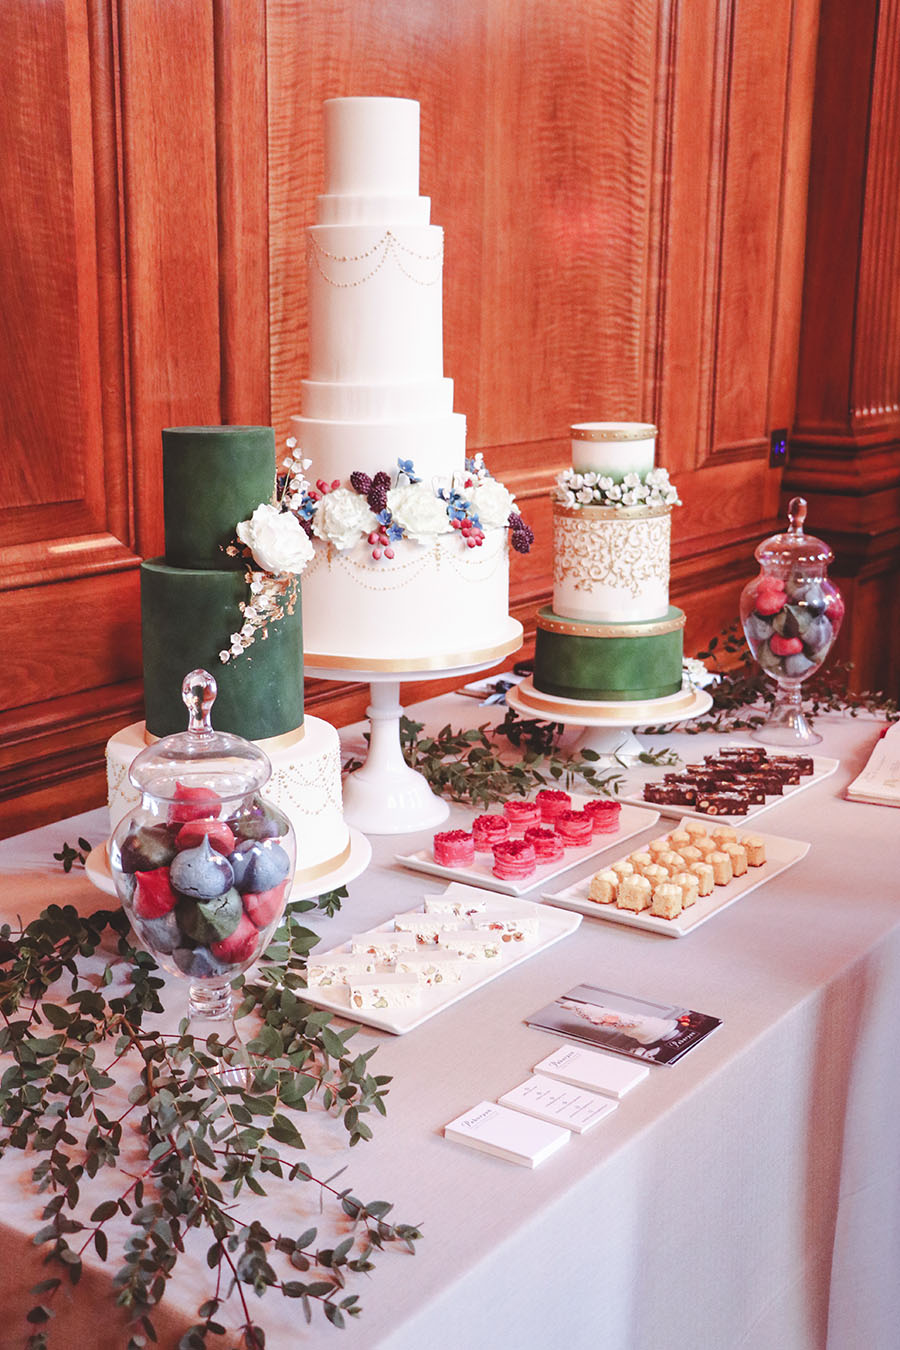 A Stylish Wedding Showcase at The Ned in London